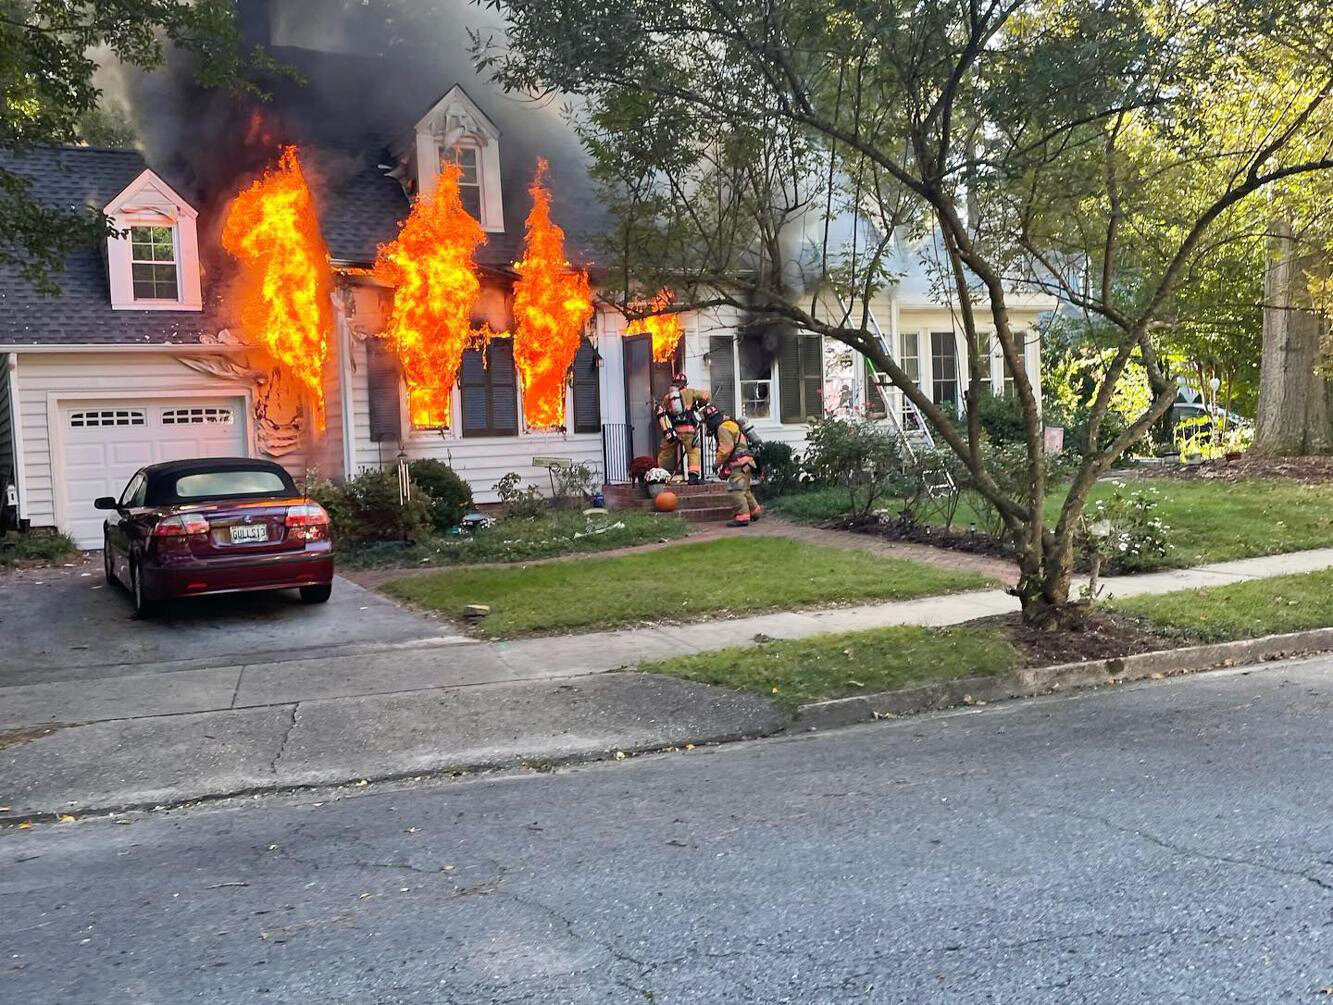 Salisbury firefighters were called to coach Jim Berkman's 1001 Russell St. home just before 10 a.m., where they found the two-story, wood-frame, single-family home engulfed in flames.